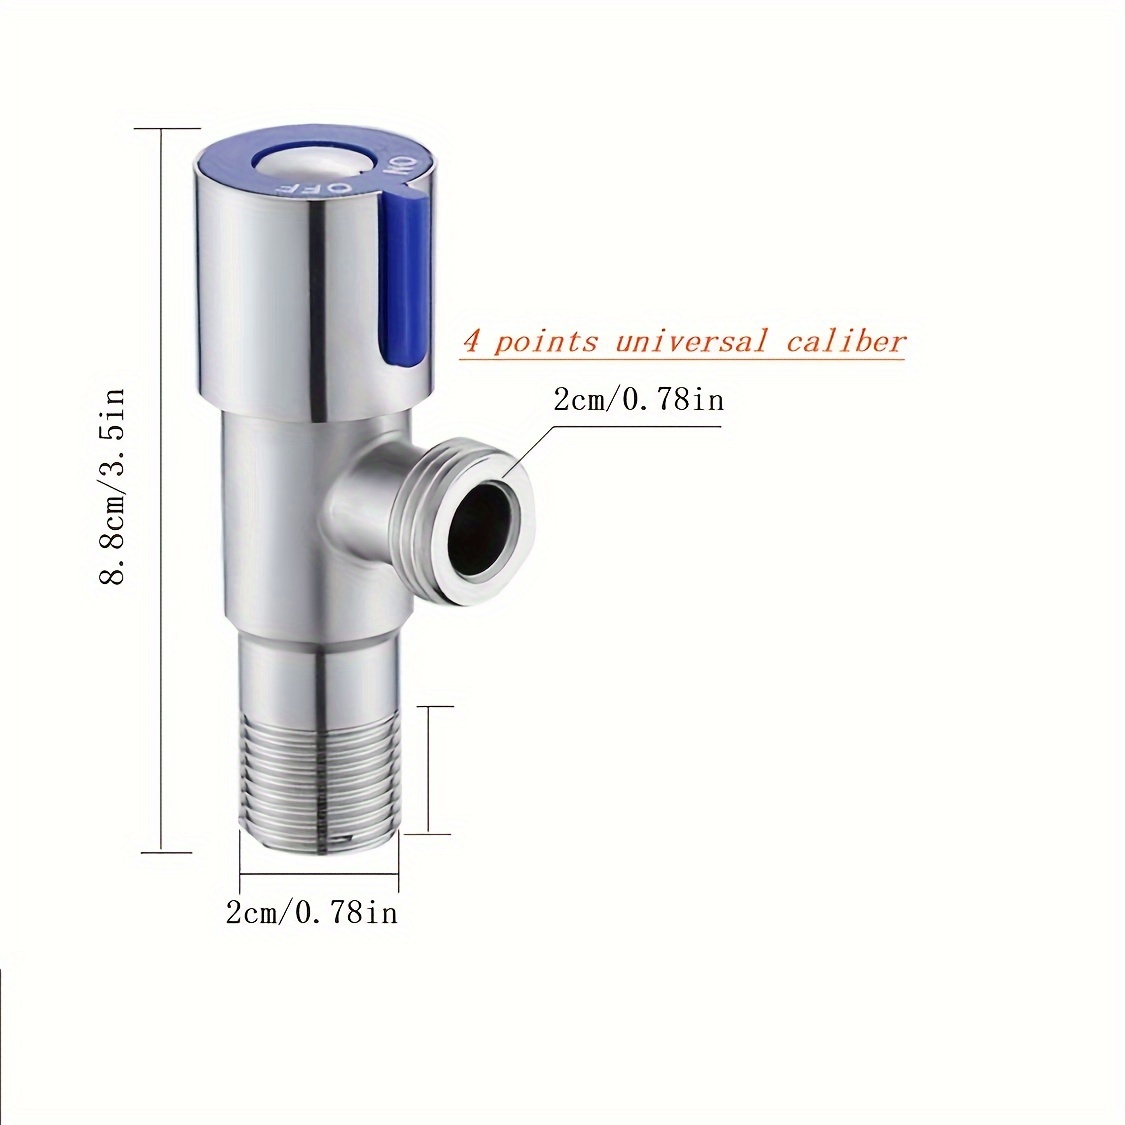 Toilet Dedicated Angle Valve With Filter Screen Stainless Steel